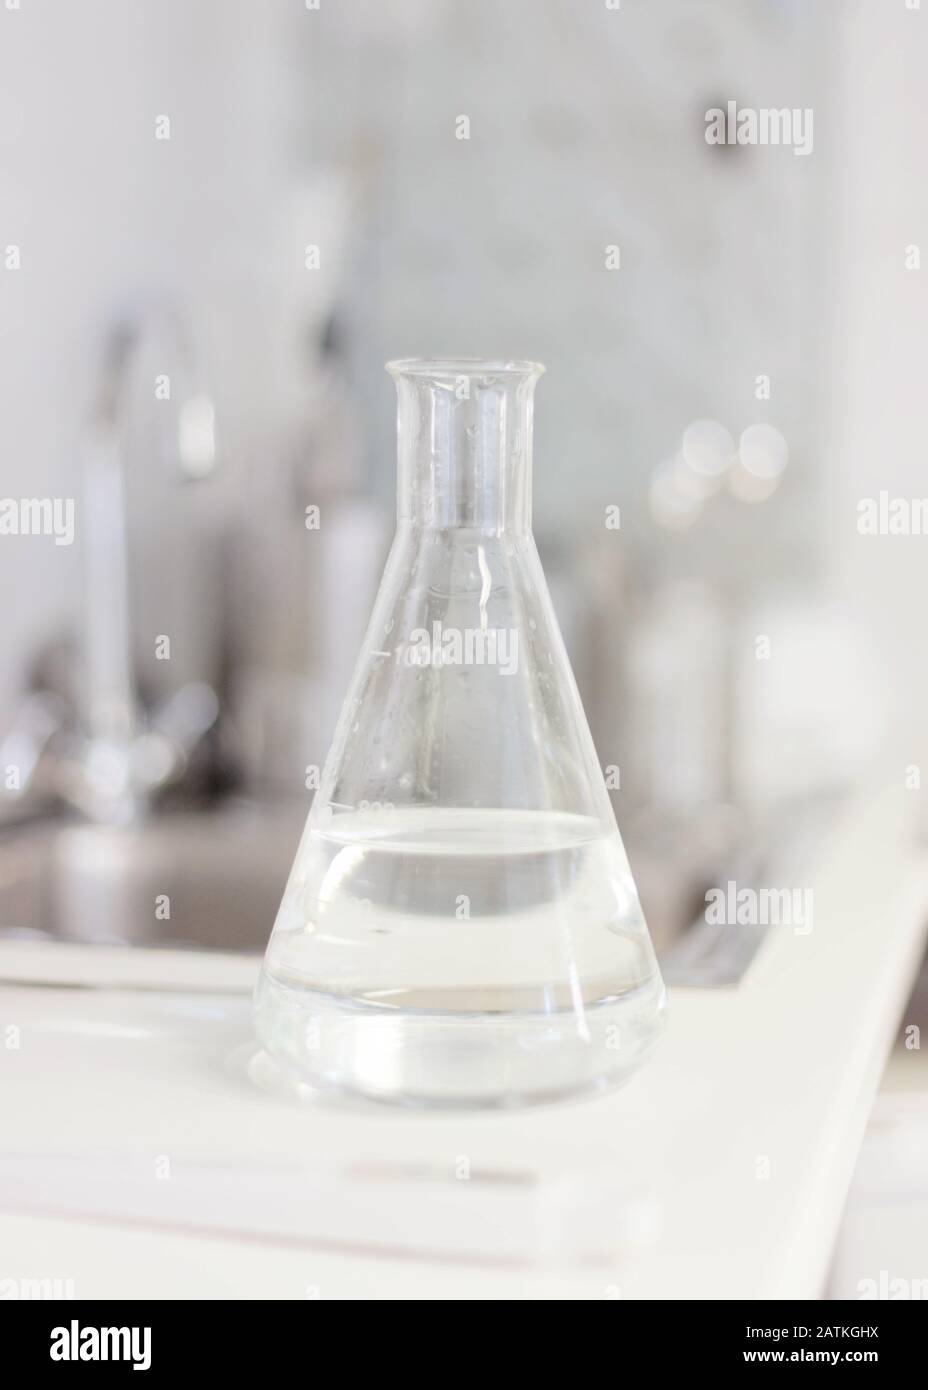 Healthcare creme production in laboratory. Creme products in lab. Healthcare industry. Scientific laboratory. Vertical shot. Stock Photo